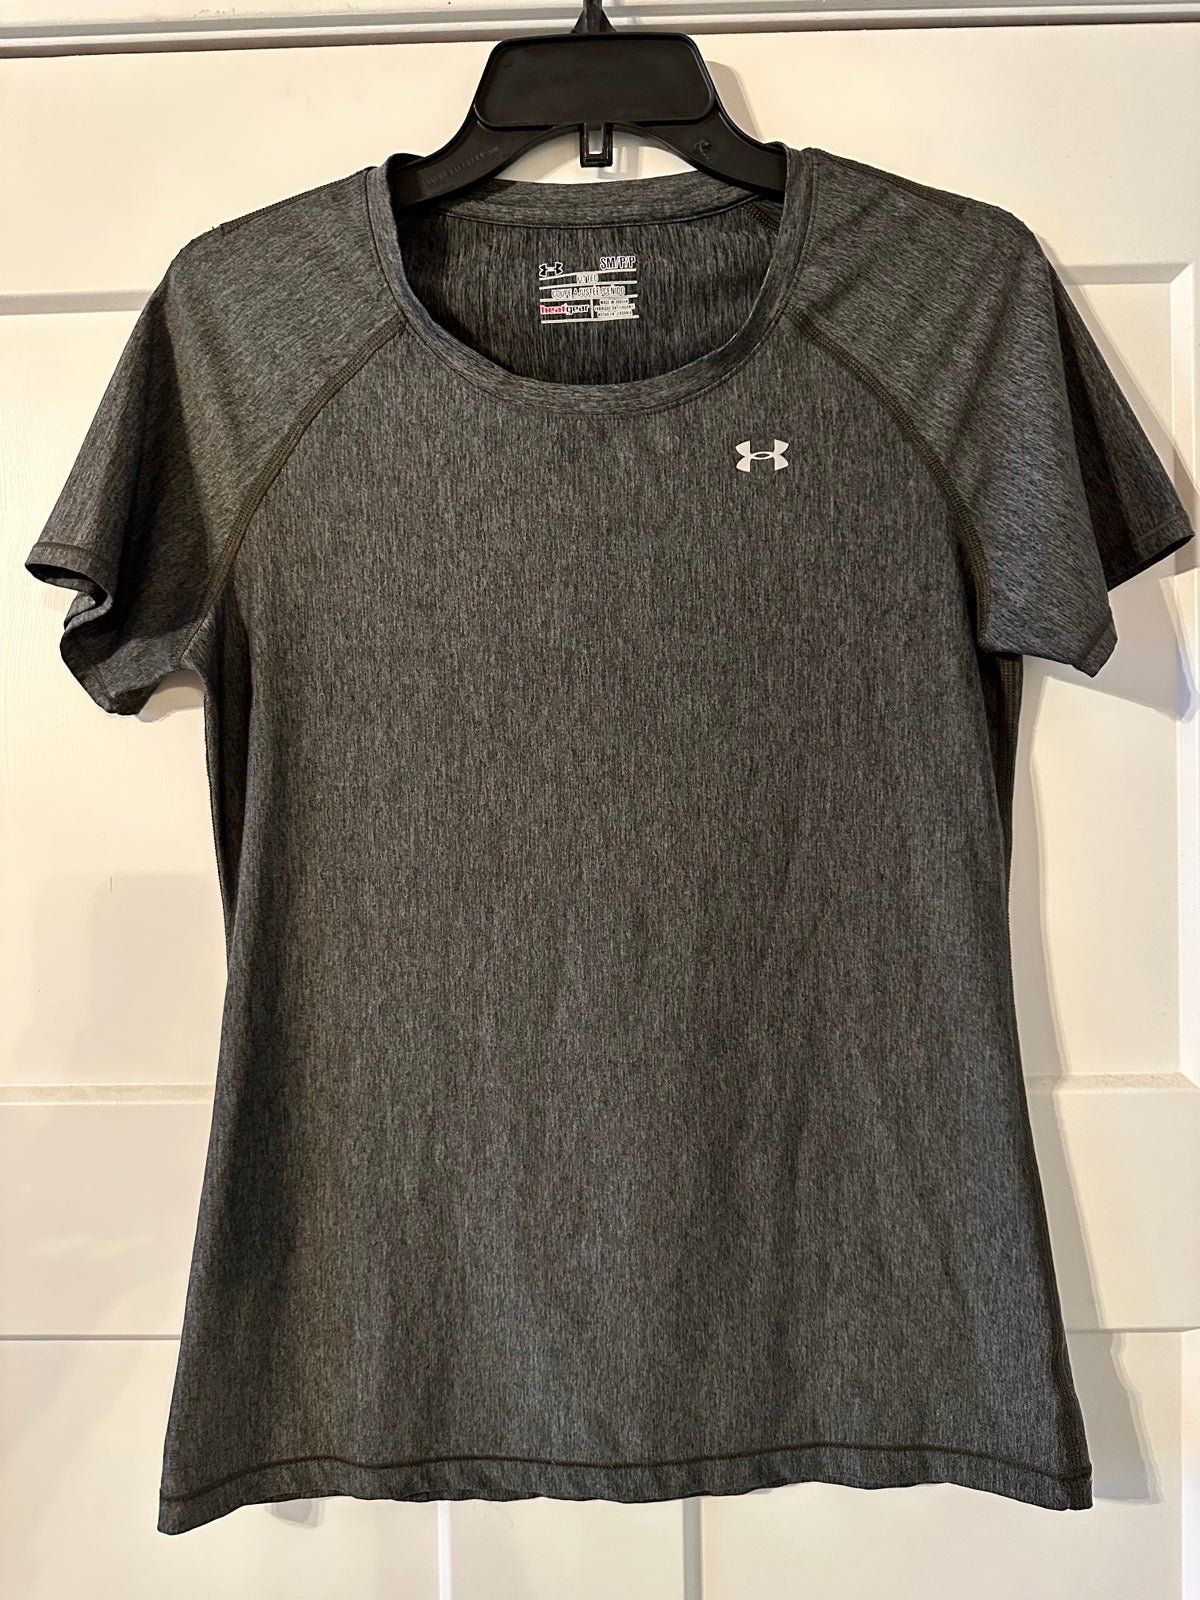 save up to 70% Under Armour Fitted Heat Gear Gray Short